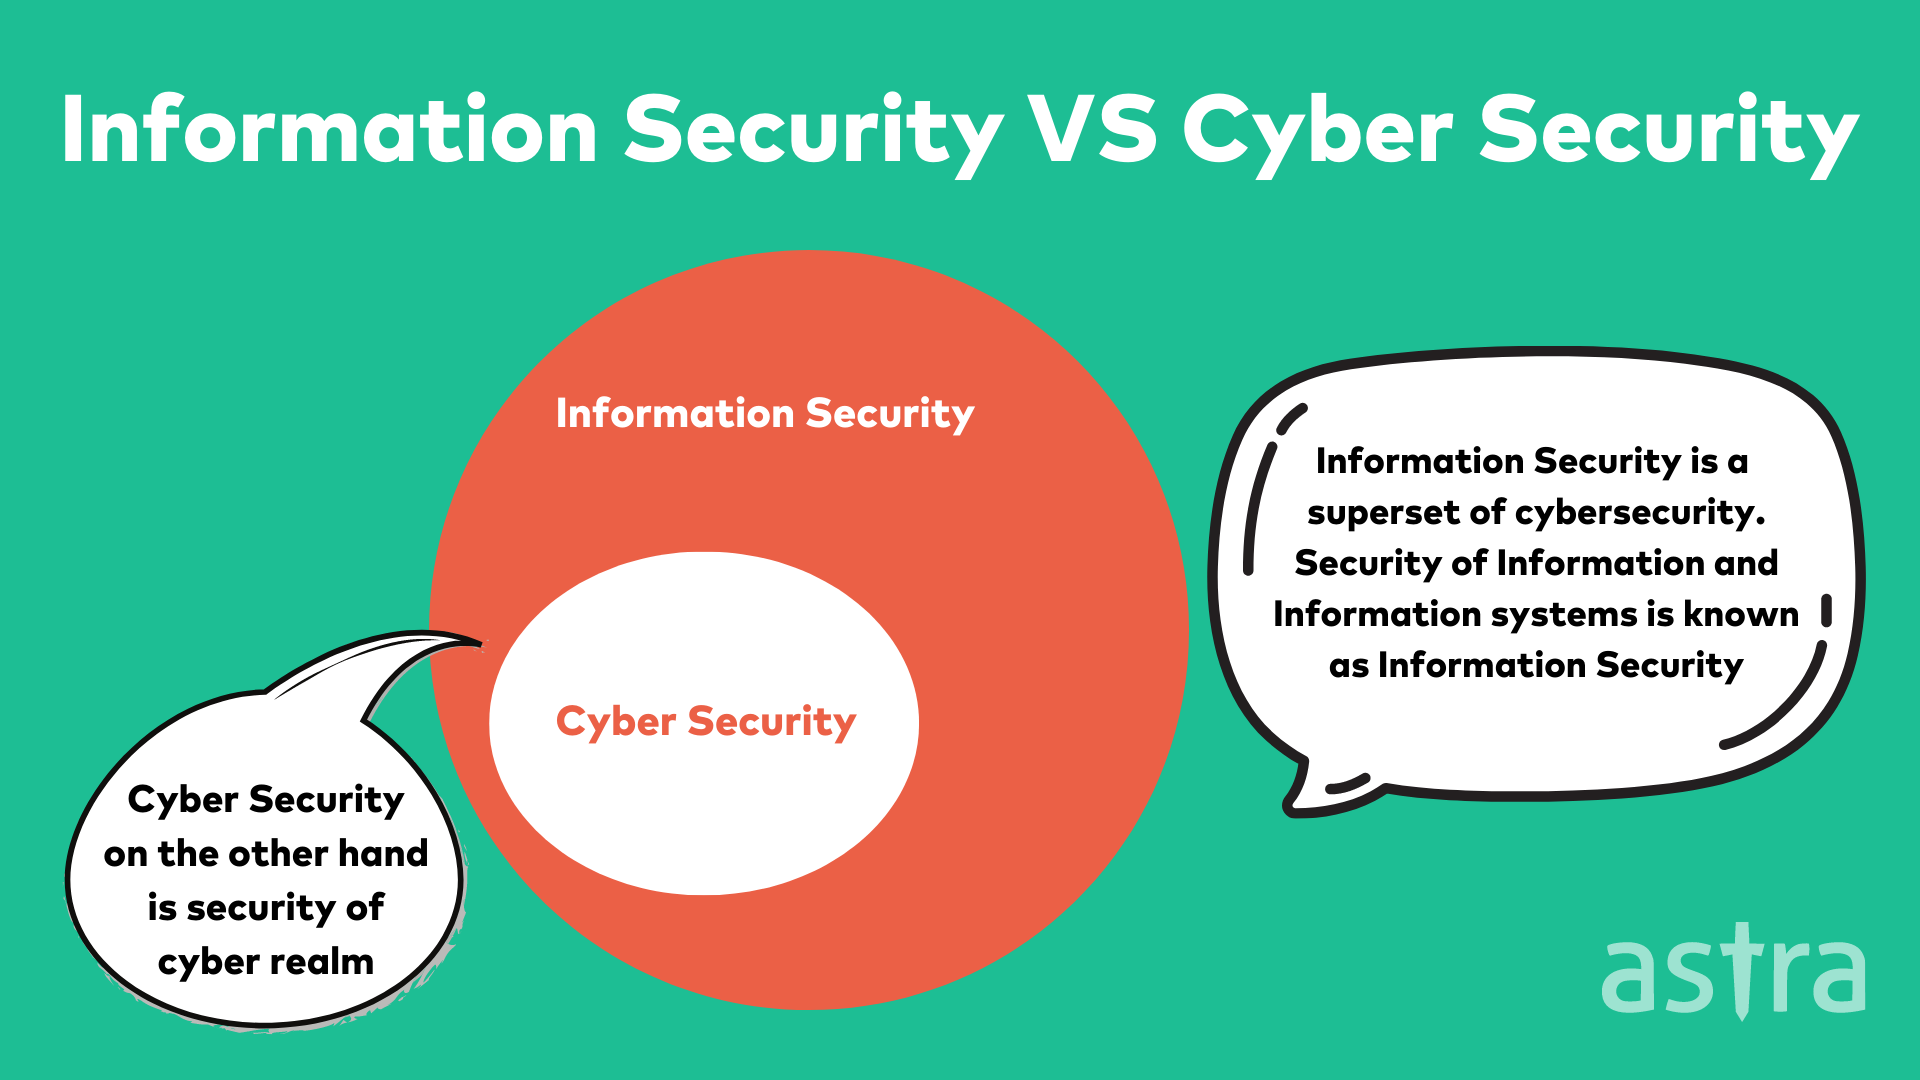 Information Security VS Cyber Security